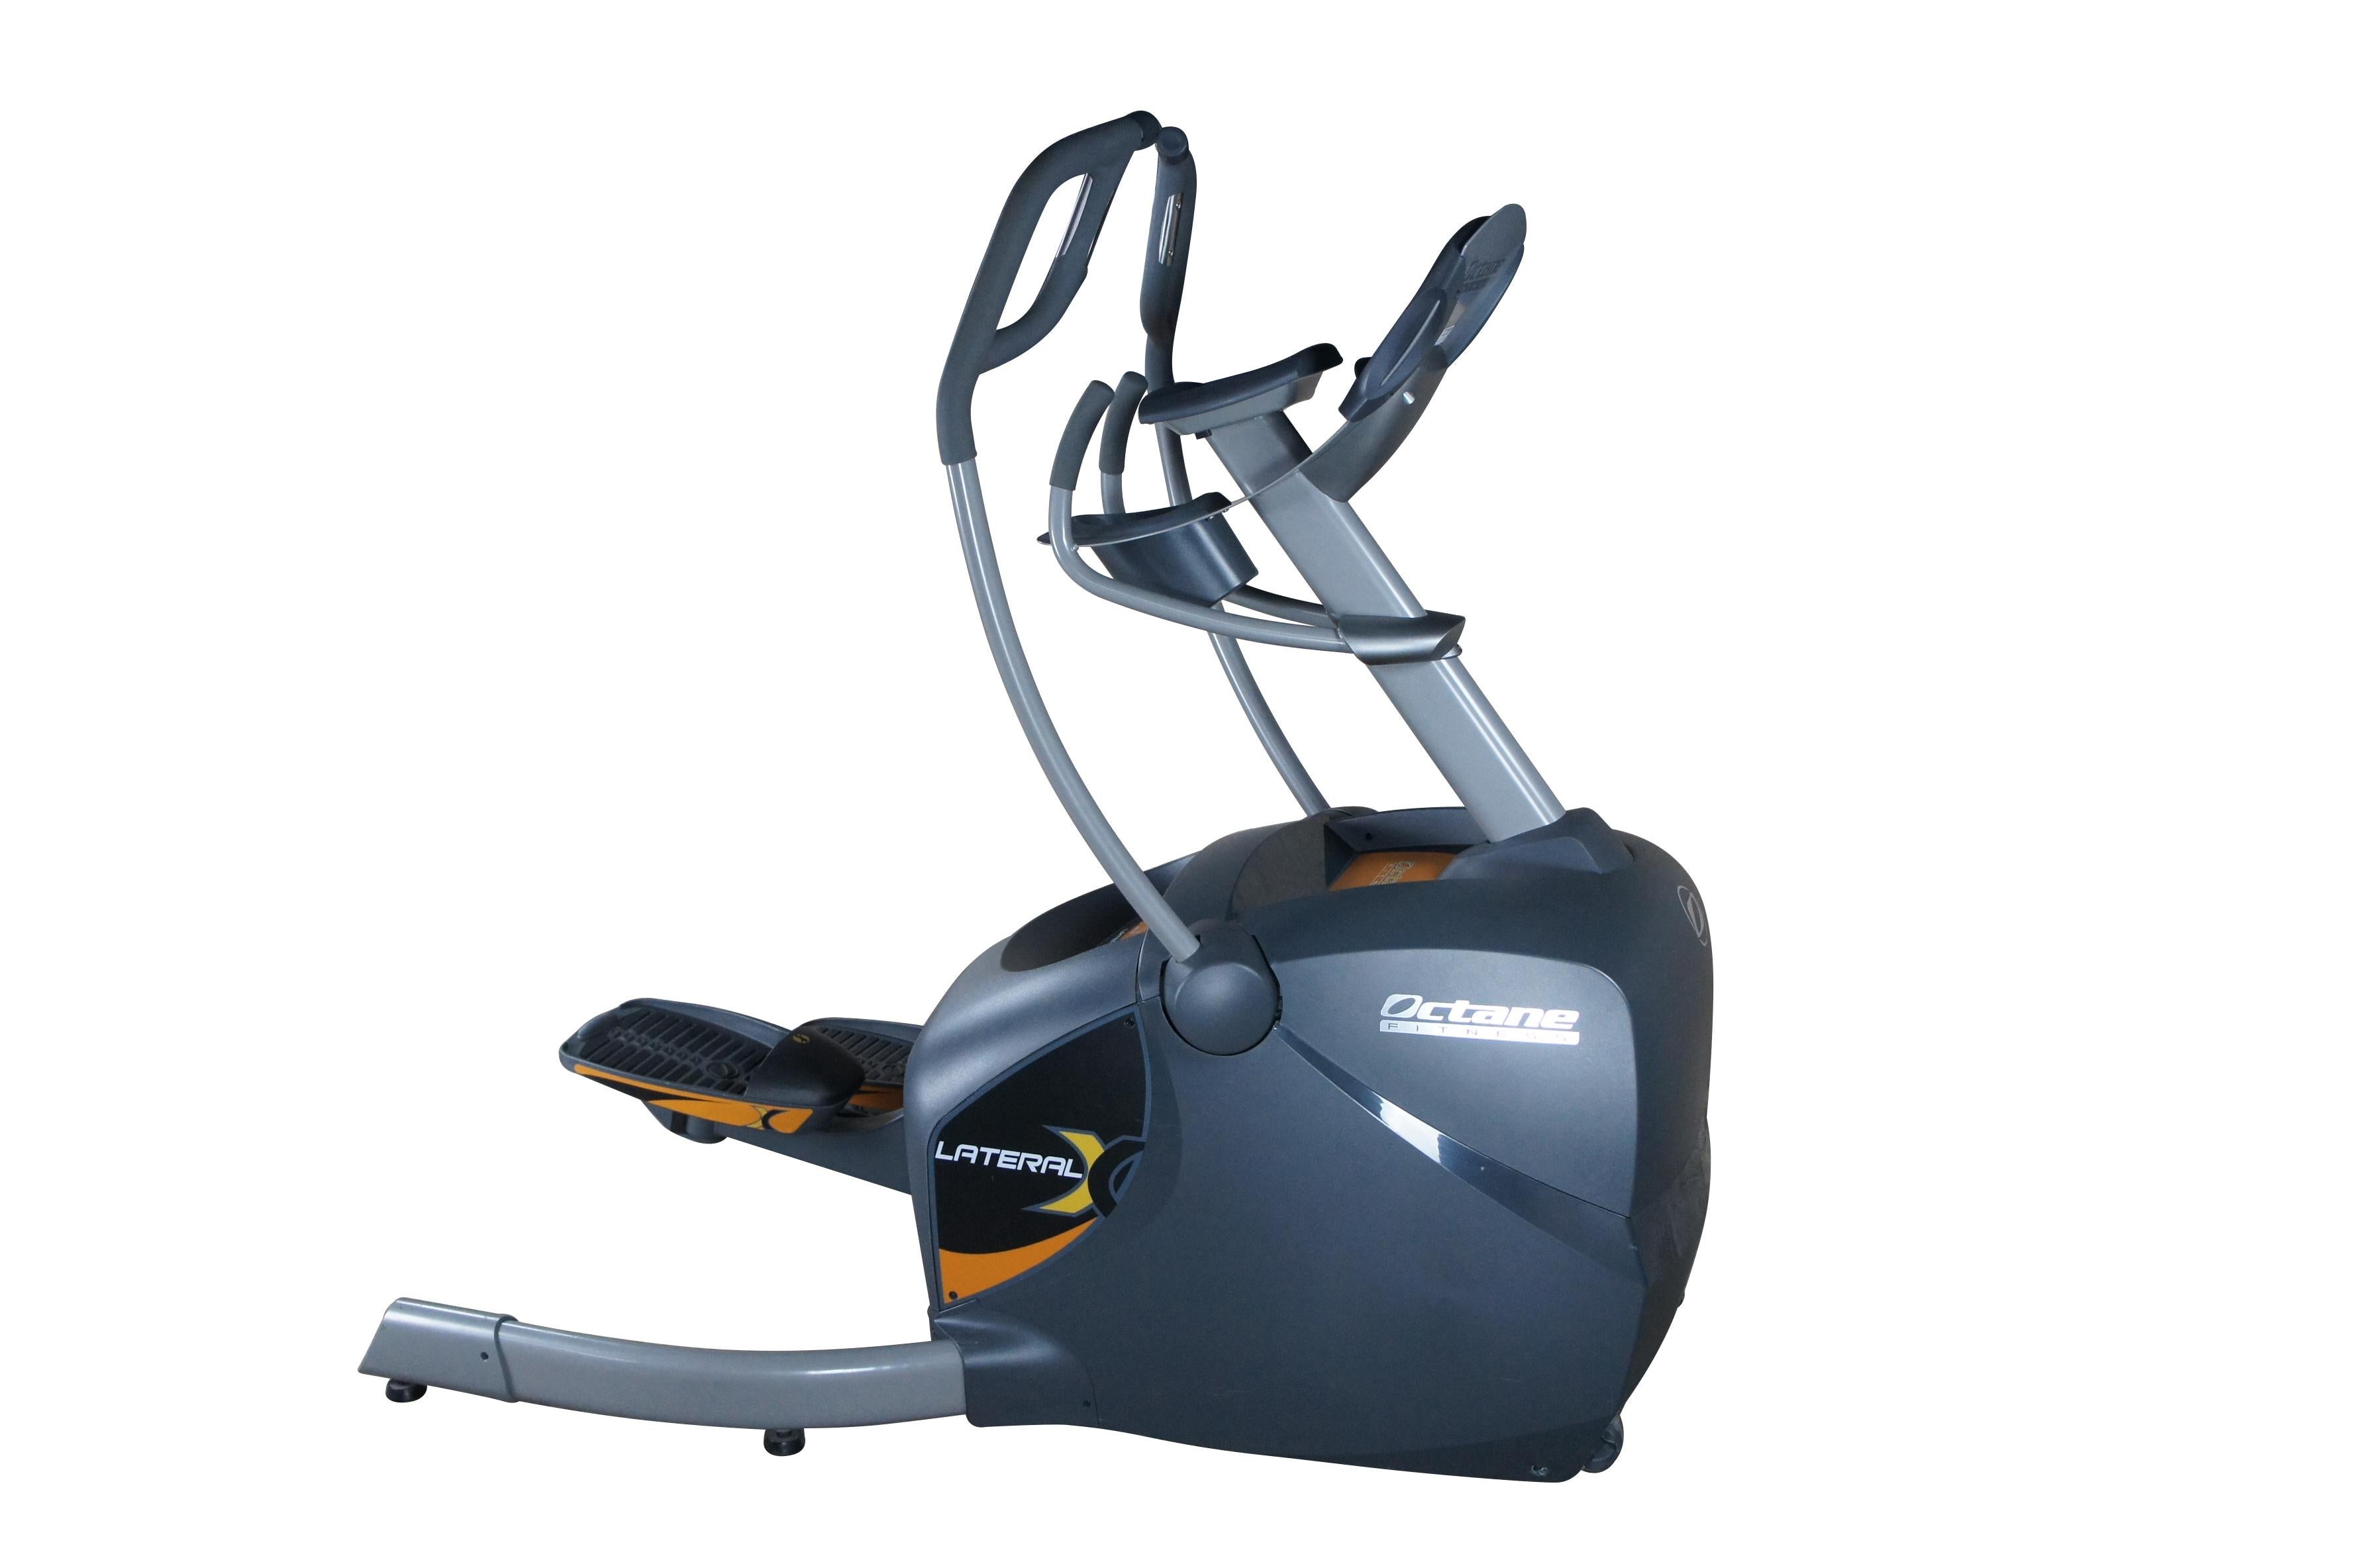 Vintage Octaine Fitness Lateral Elliptical LX8000.

Setting a new standard for innovation, Octane’s award-winning Lateral X keeps getting better. Now with a streamlined design, contemporary colors and a quieter stride adjustment motor, this cross